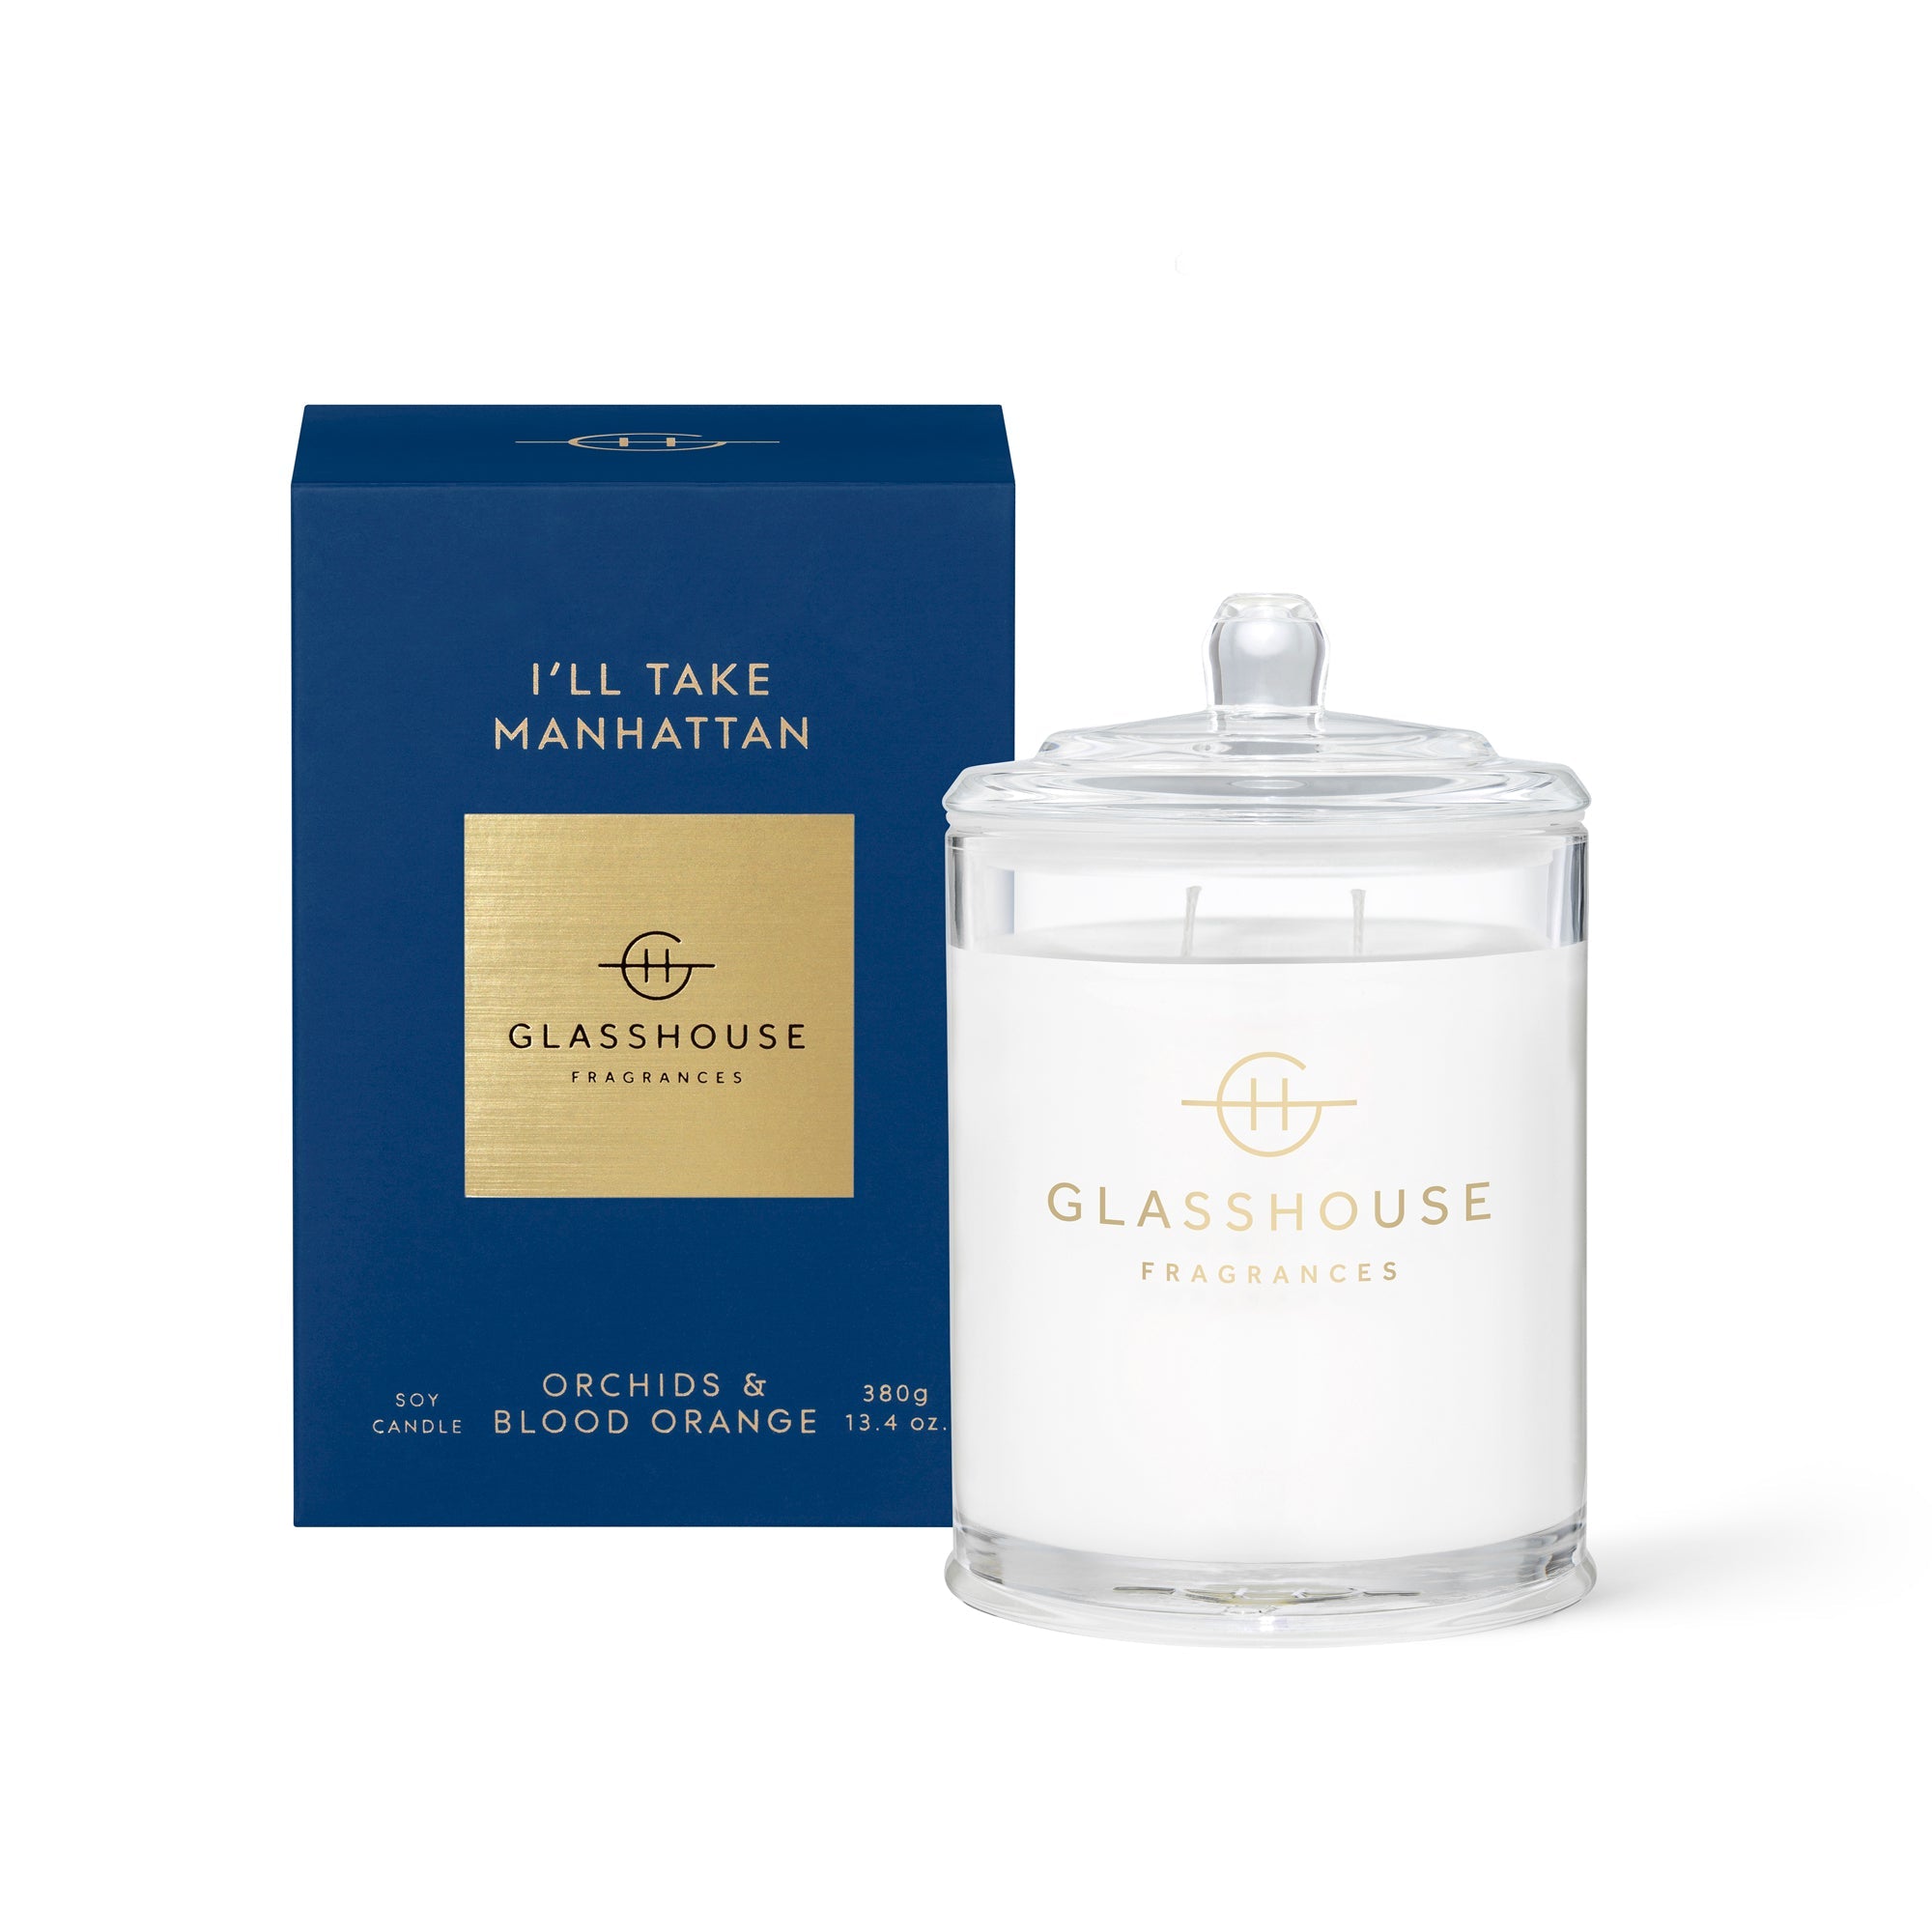 Glasshouse I'll Take Manhattan Candle 380g - Exquisite Laser Clinic